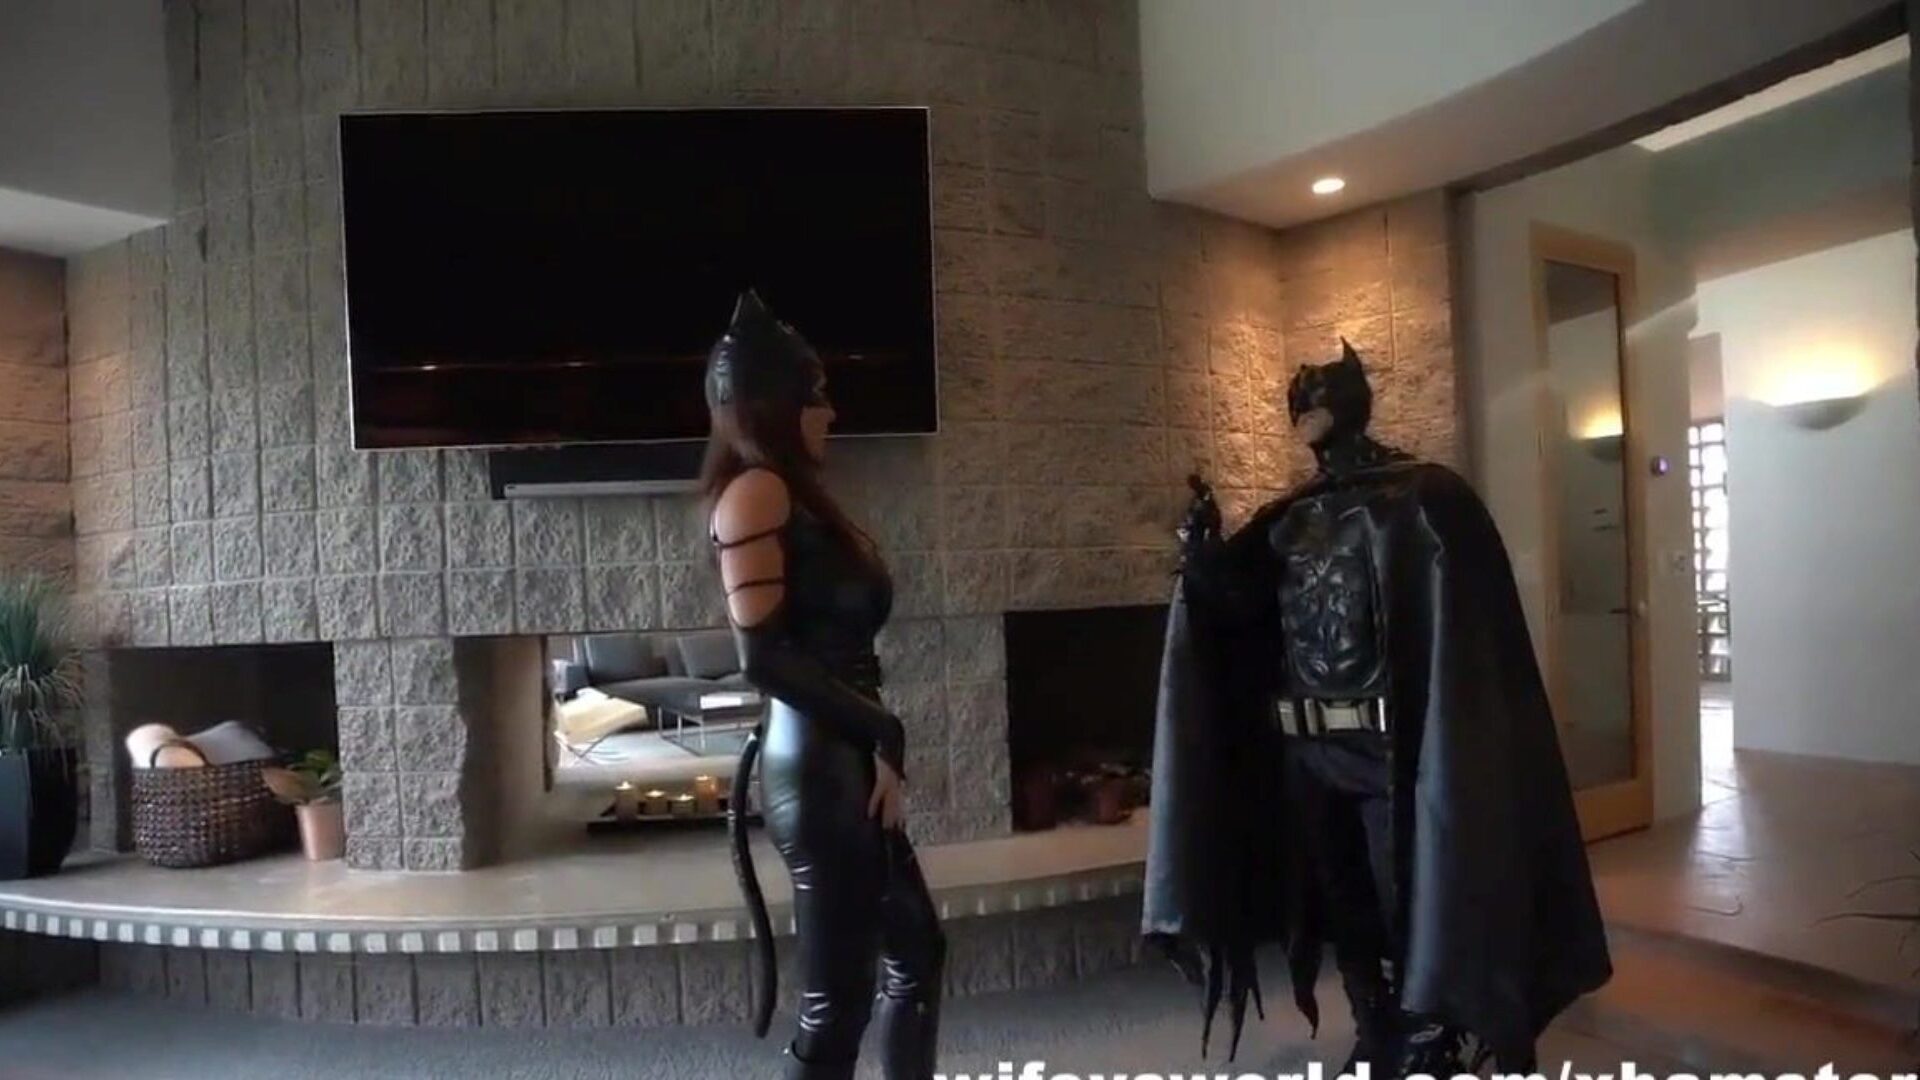 Stunning mother I'd like to fuck in Catsuit Blows Caped Crusader Cock Bat Man comes back home from saving the town and doesn't have much time. Never fear Busty Cat MILF know how to get what this babe craves fastly She deep throats and faps his large cock until this guy discharges his supah c